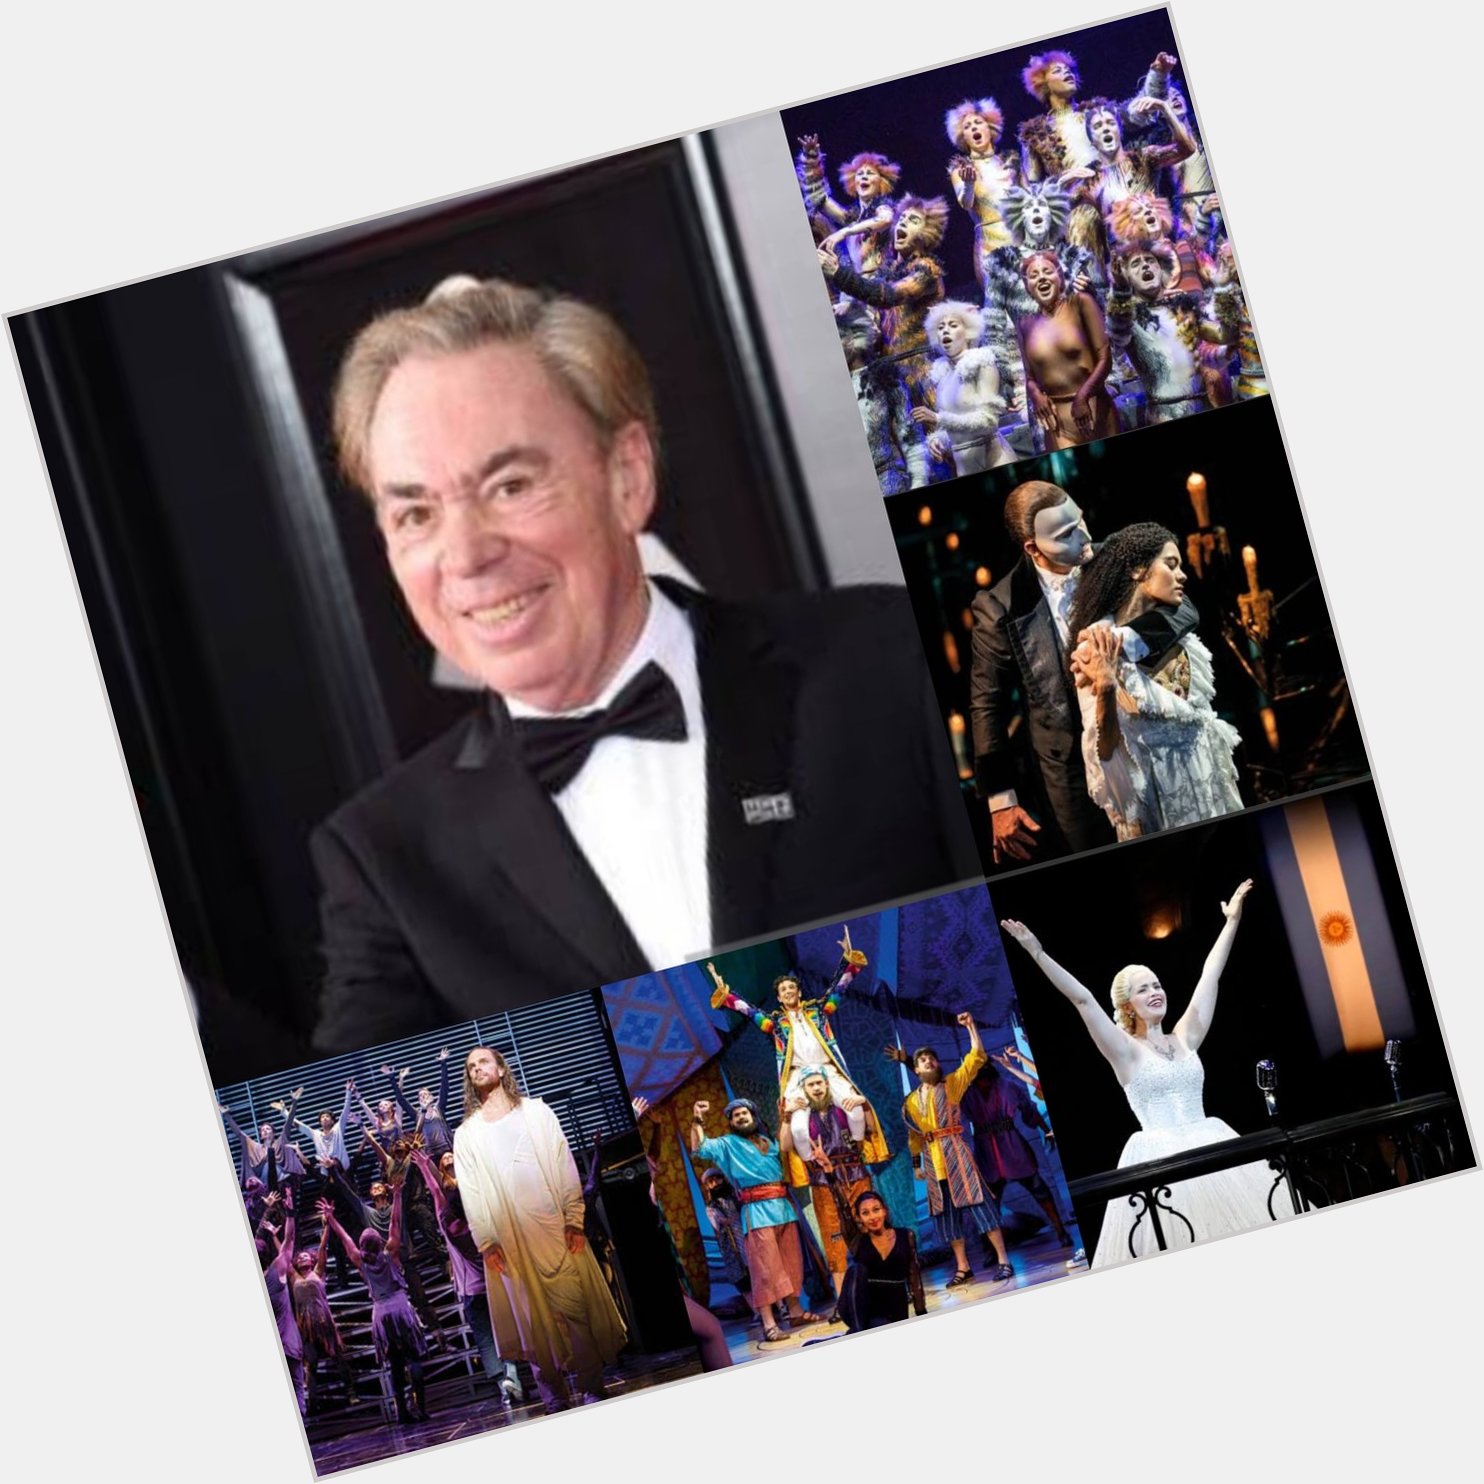 Happy birthday to Sir Andrew Lloyd Webber thank you for such amazing musicals 